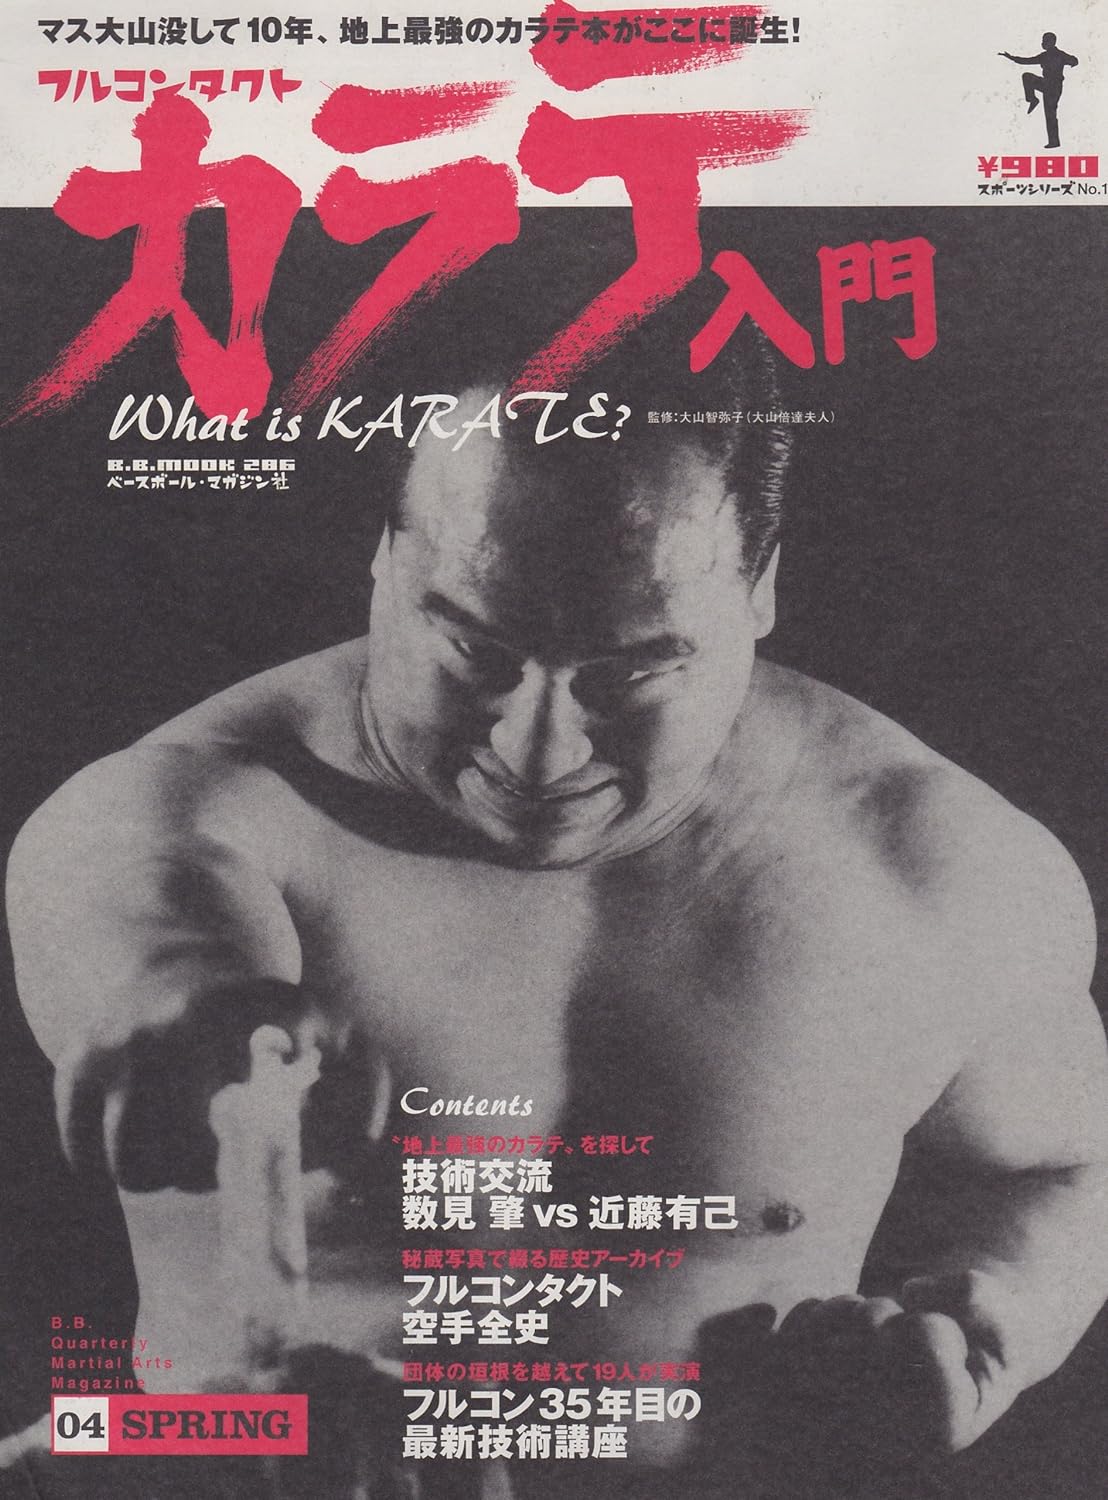 Intro to Full Contact Karate: 10 Years Since Mas Oyama Passed Book (Preowned)